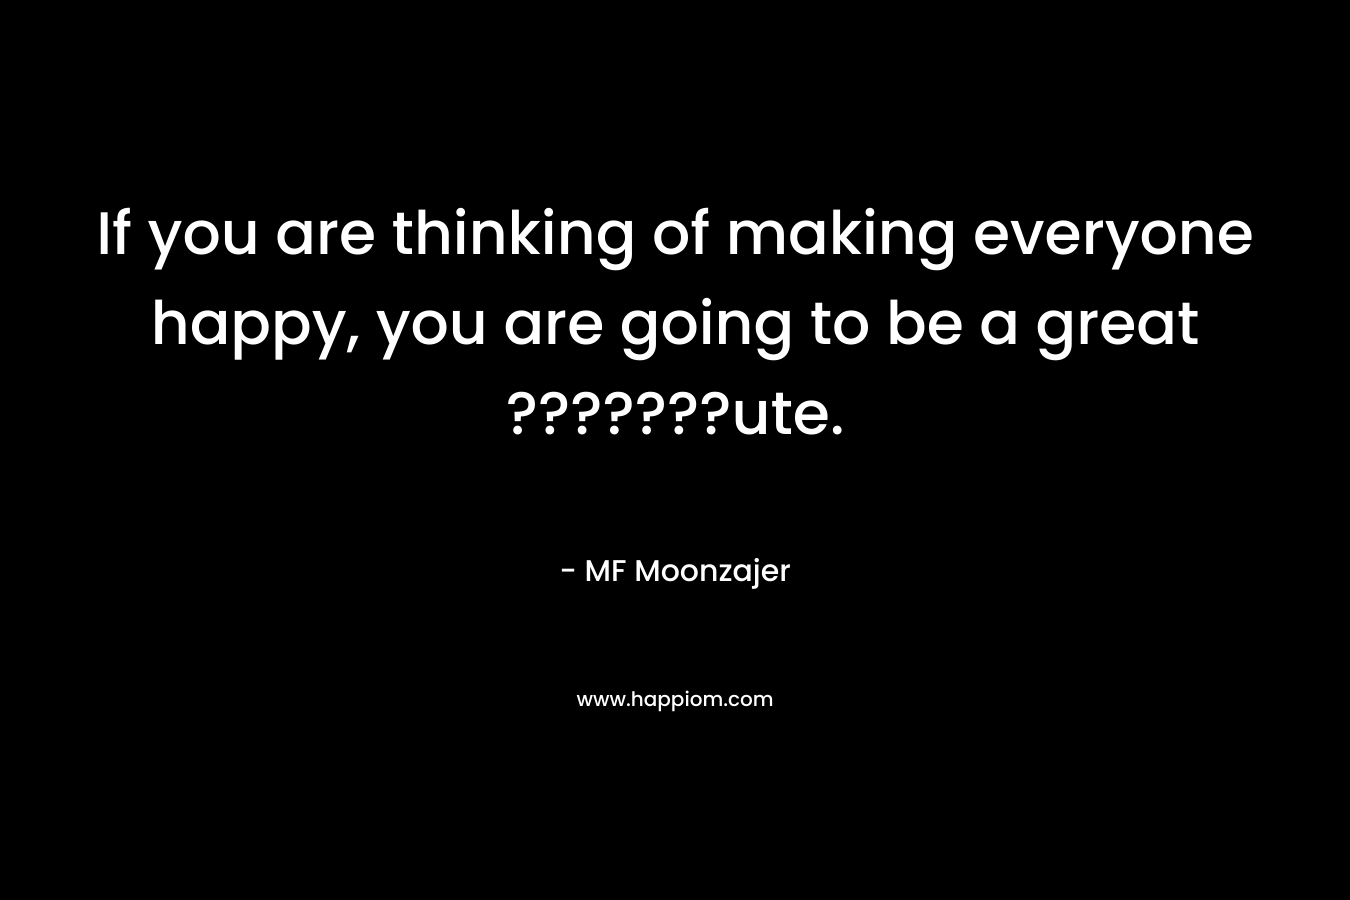 If you are thinking of making everyone happy, you are going to be a great ???????ute. – MF Moonzajer